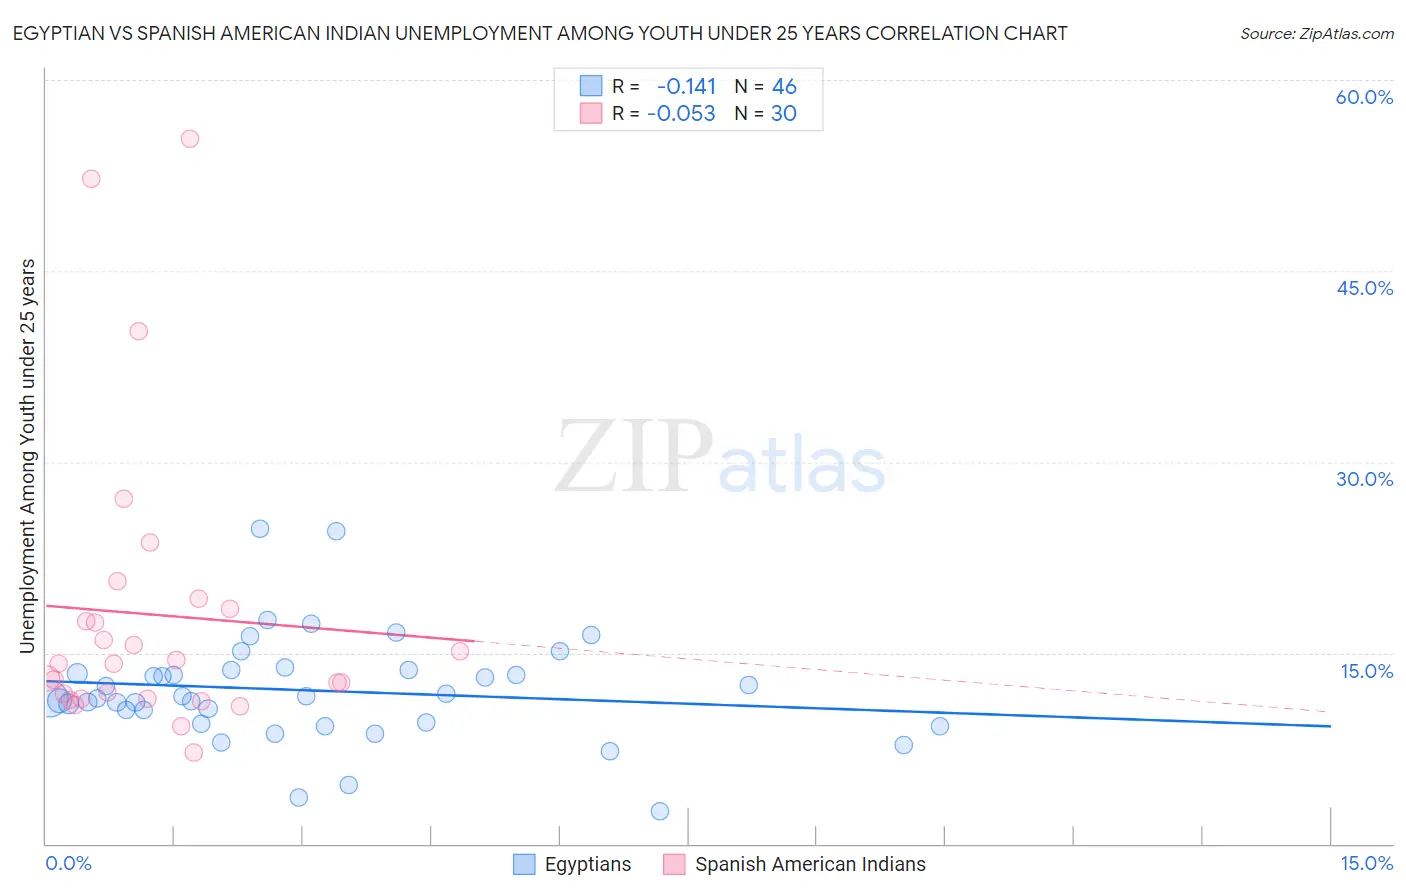 Egyptian vs Spanish American Indian Unemployment Among Youth under 25 years